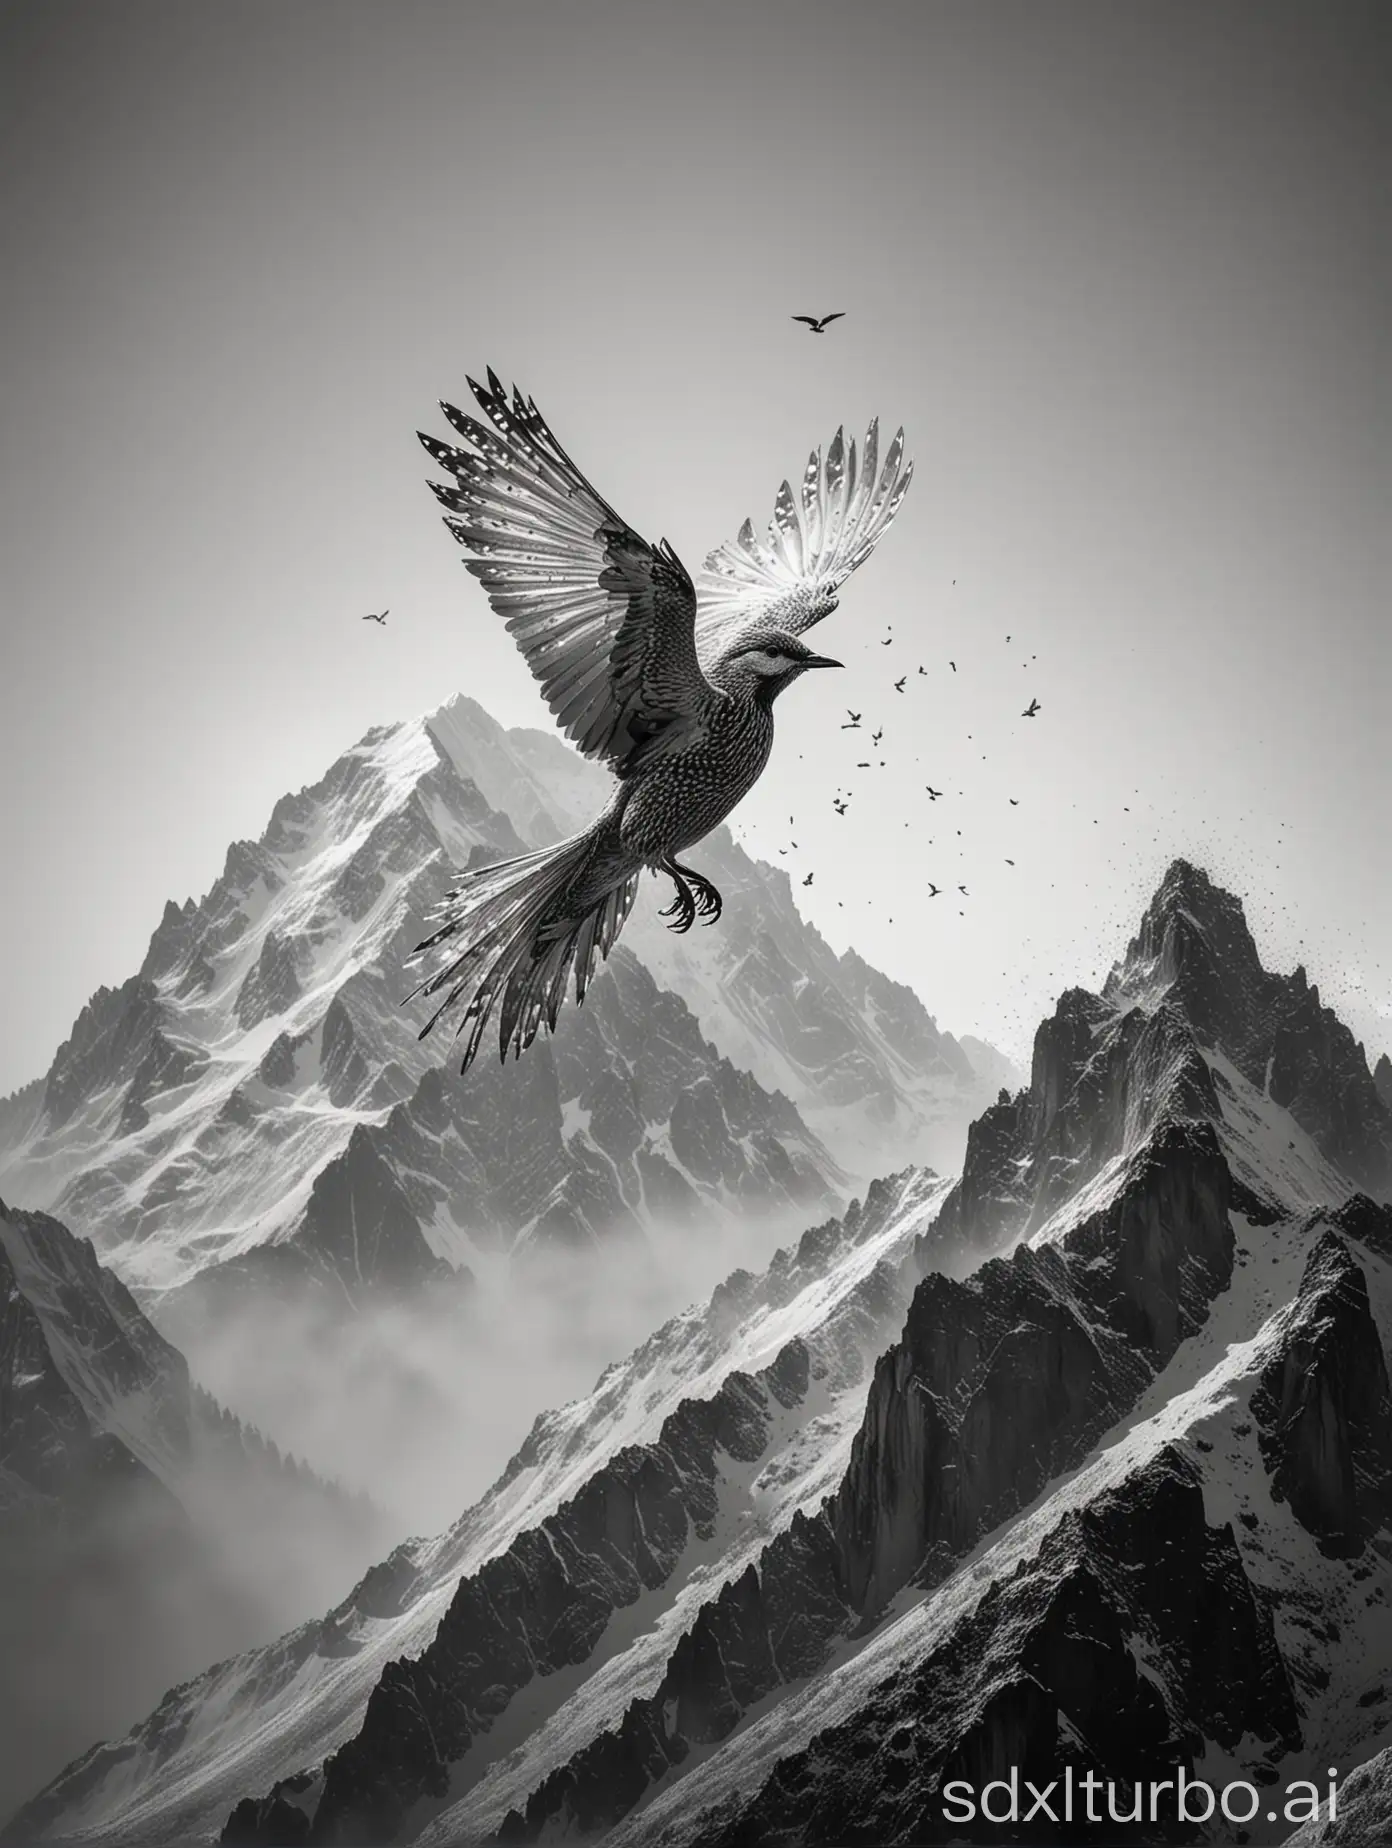 On a pure white background, countless tiny and delicate black dotted textures coalesce into a bird spreading its wings and flying high, with full plumage and graceful posture. At the same time, these dotted textures also ingeniously form a majestic mountain with overlapping peaks, towering and magnificent. Between the bird and the mountain, light and shadow intermingle, creating a dreamy and three-dimensional visual effect. The bird seems to be chasing the contours of the mountain, and the entire image is filled with a sense of motion and harmony. 